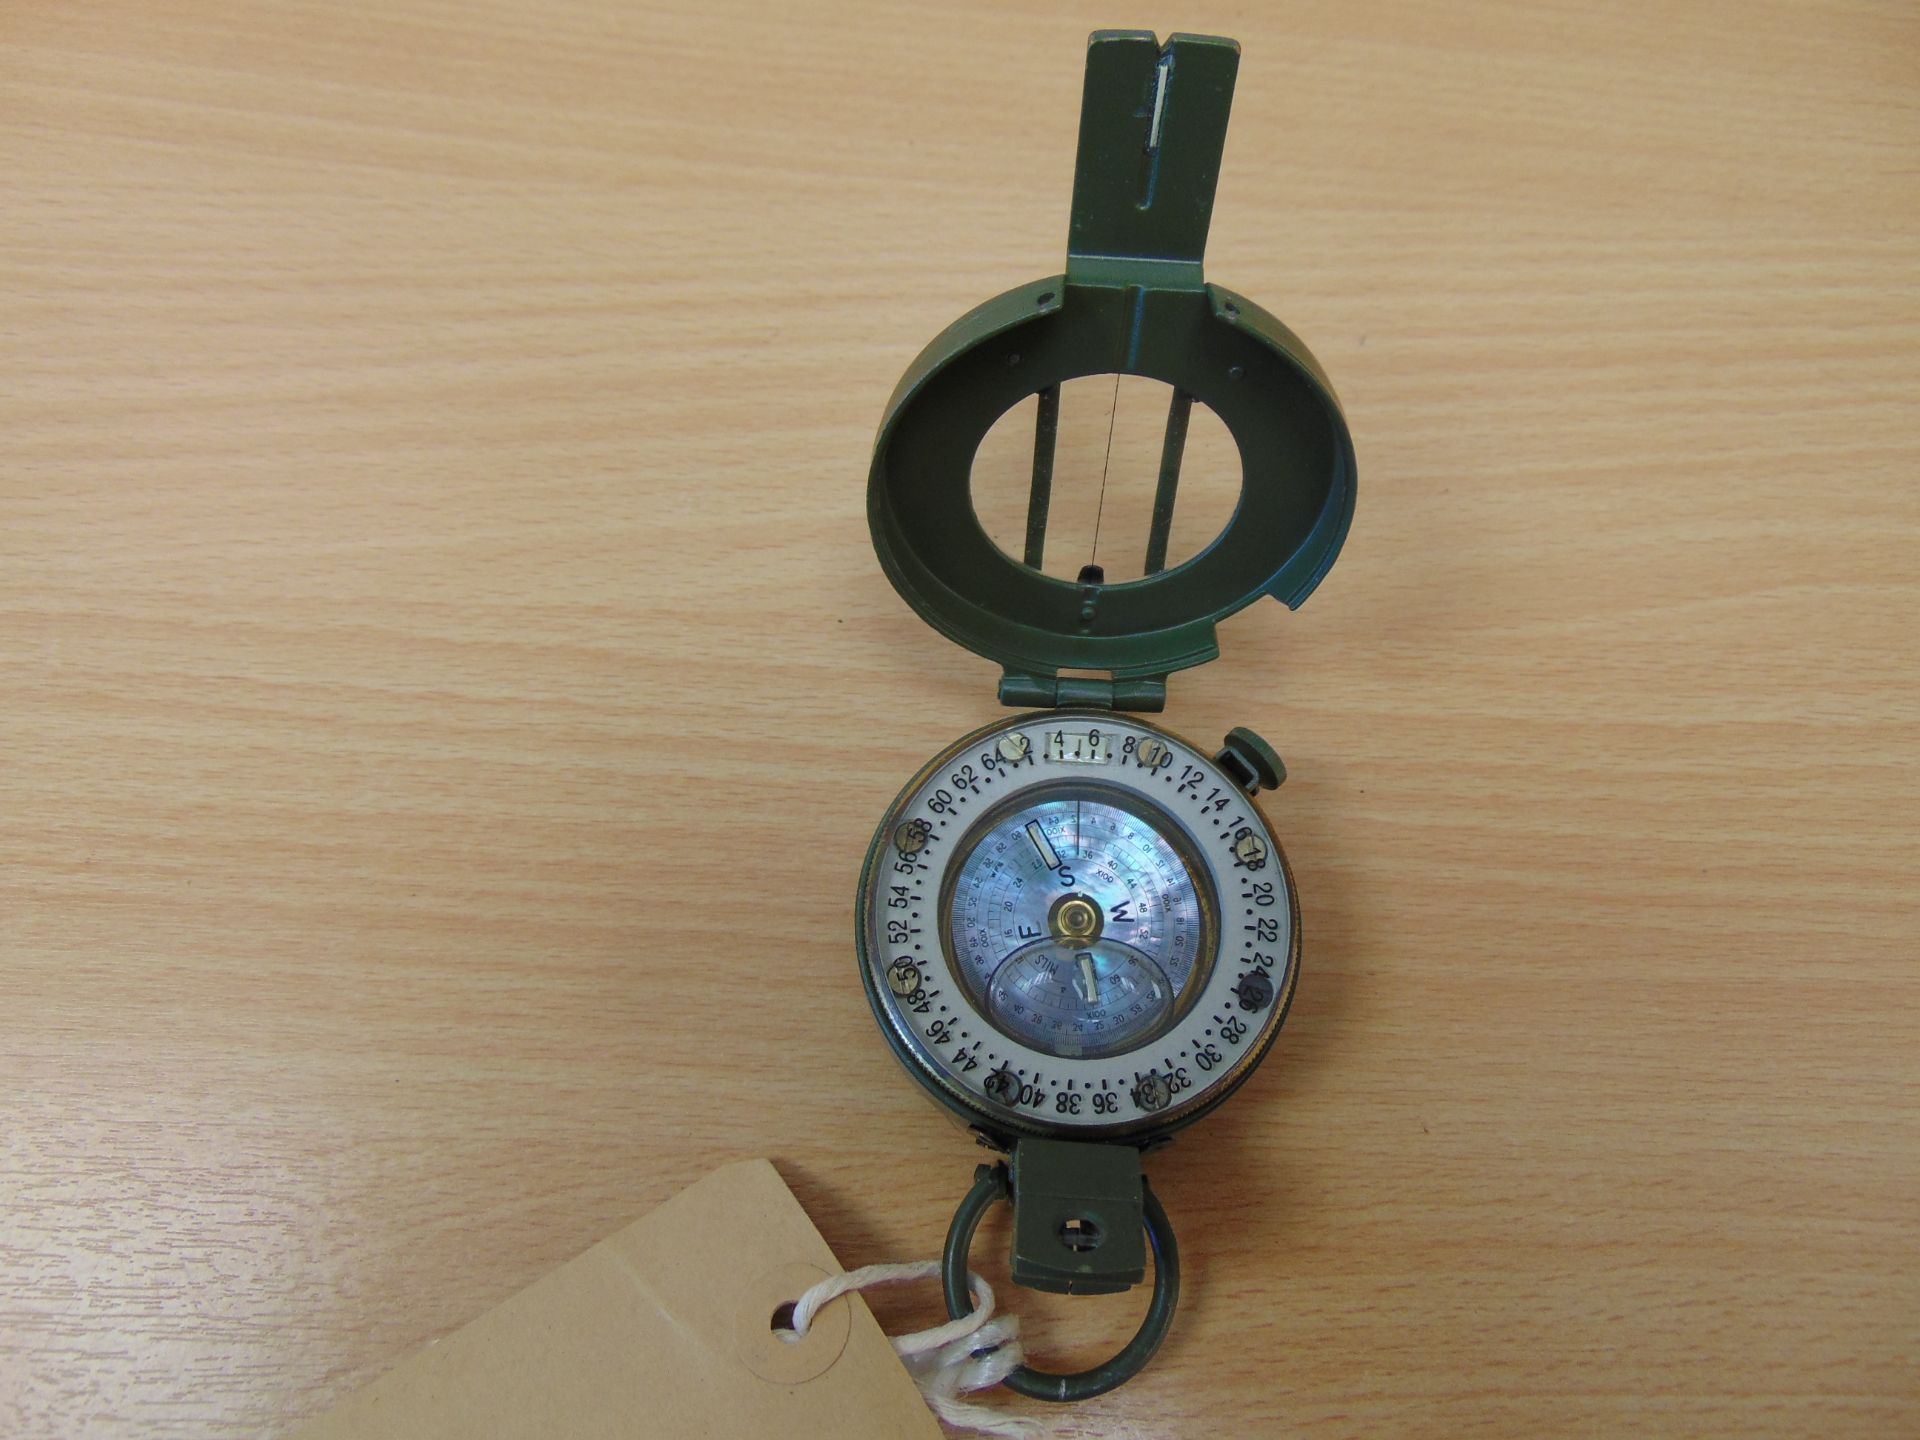 Stanley London British Army Brass Prismatic Compass Nato Marks in Miles - Image 2 of 3